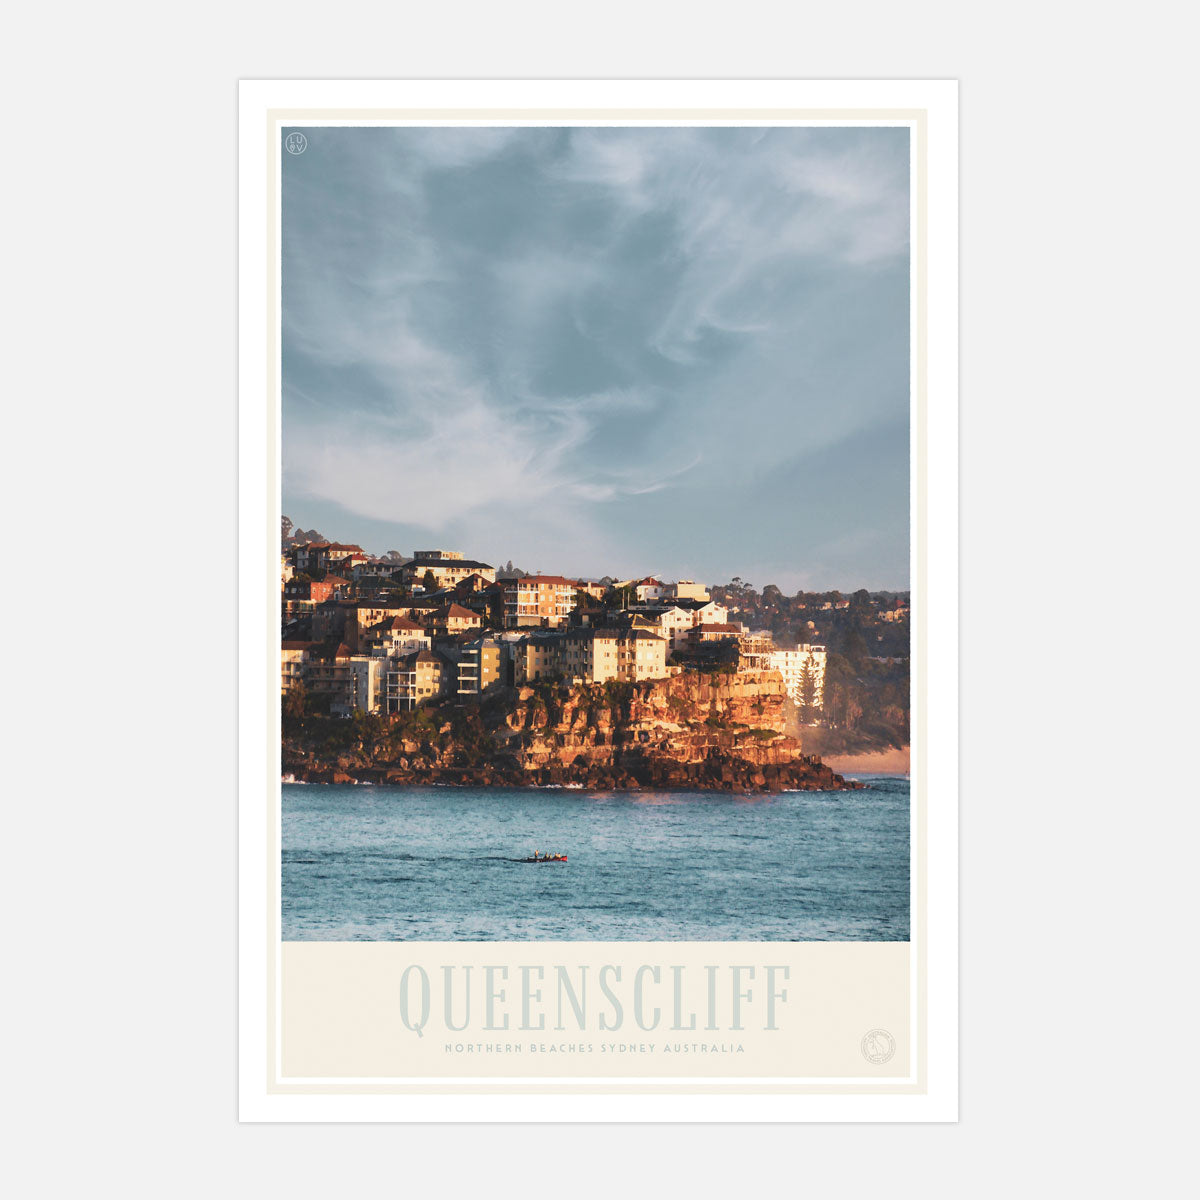 Queenslcliff Manly vintage retro print from Places We Luv